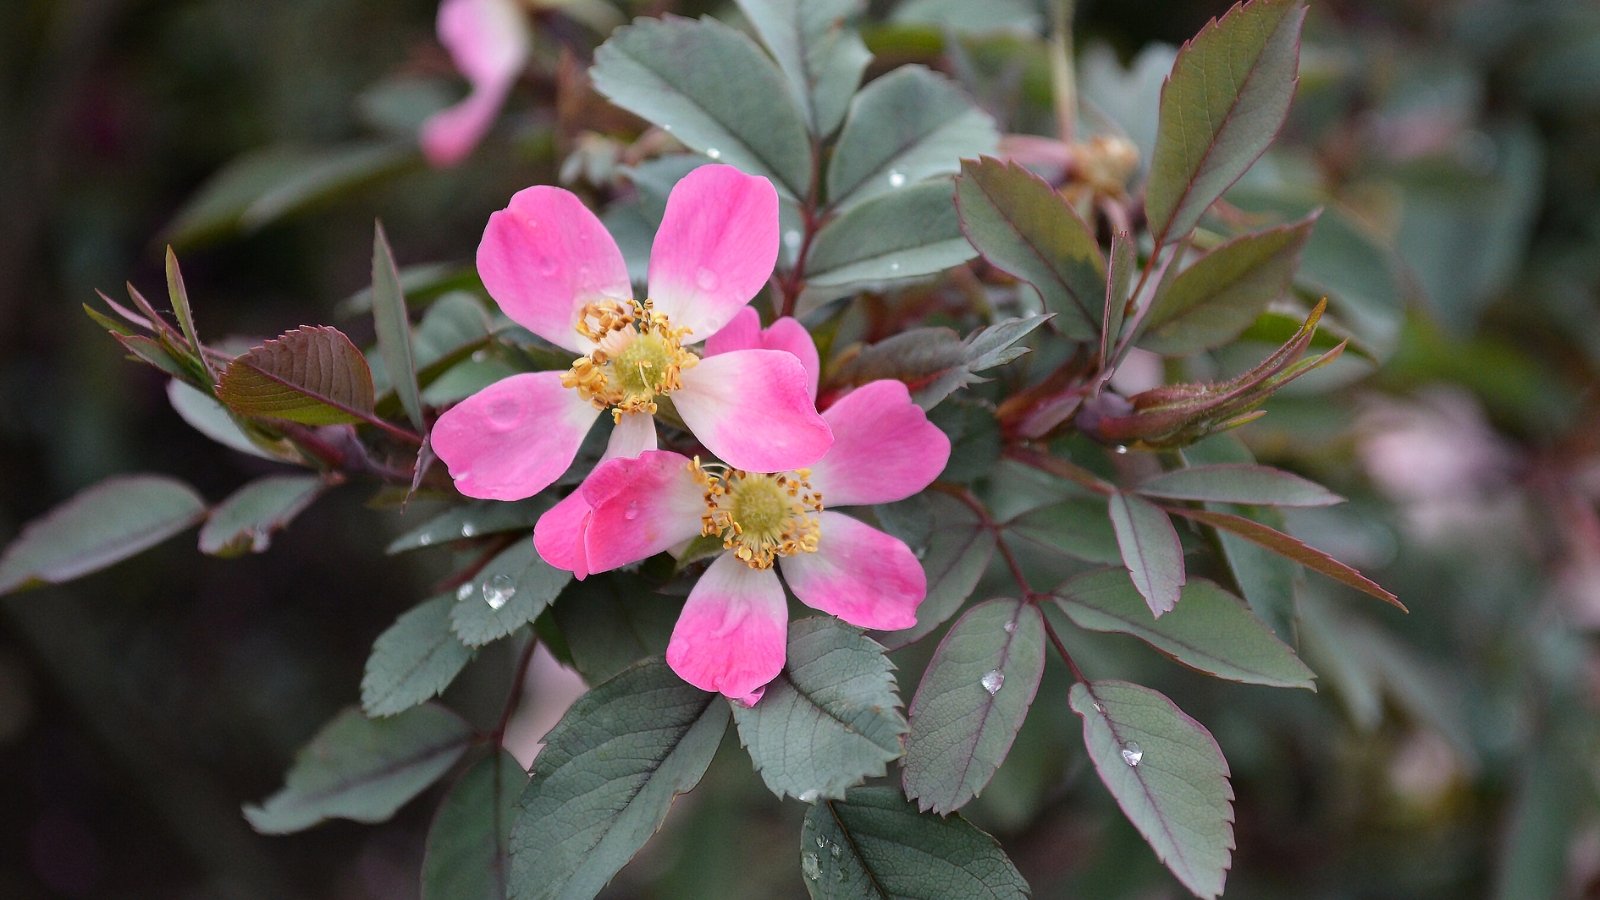 Rosa glauca exhibits striking purplish-red stems, bluish-gray foliage with red veining, and small, single pink flowers with a white center.